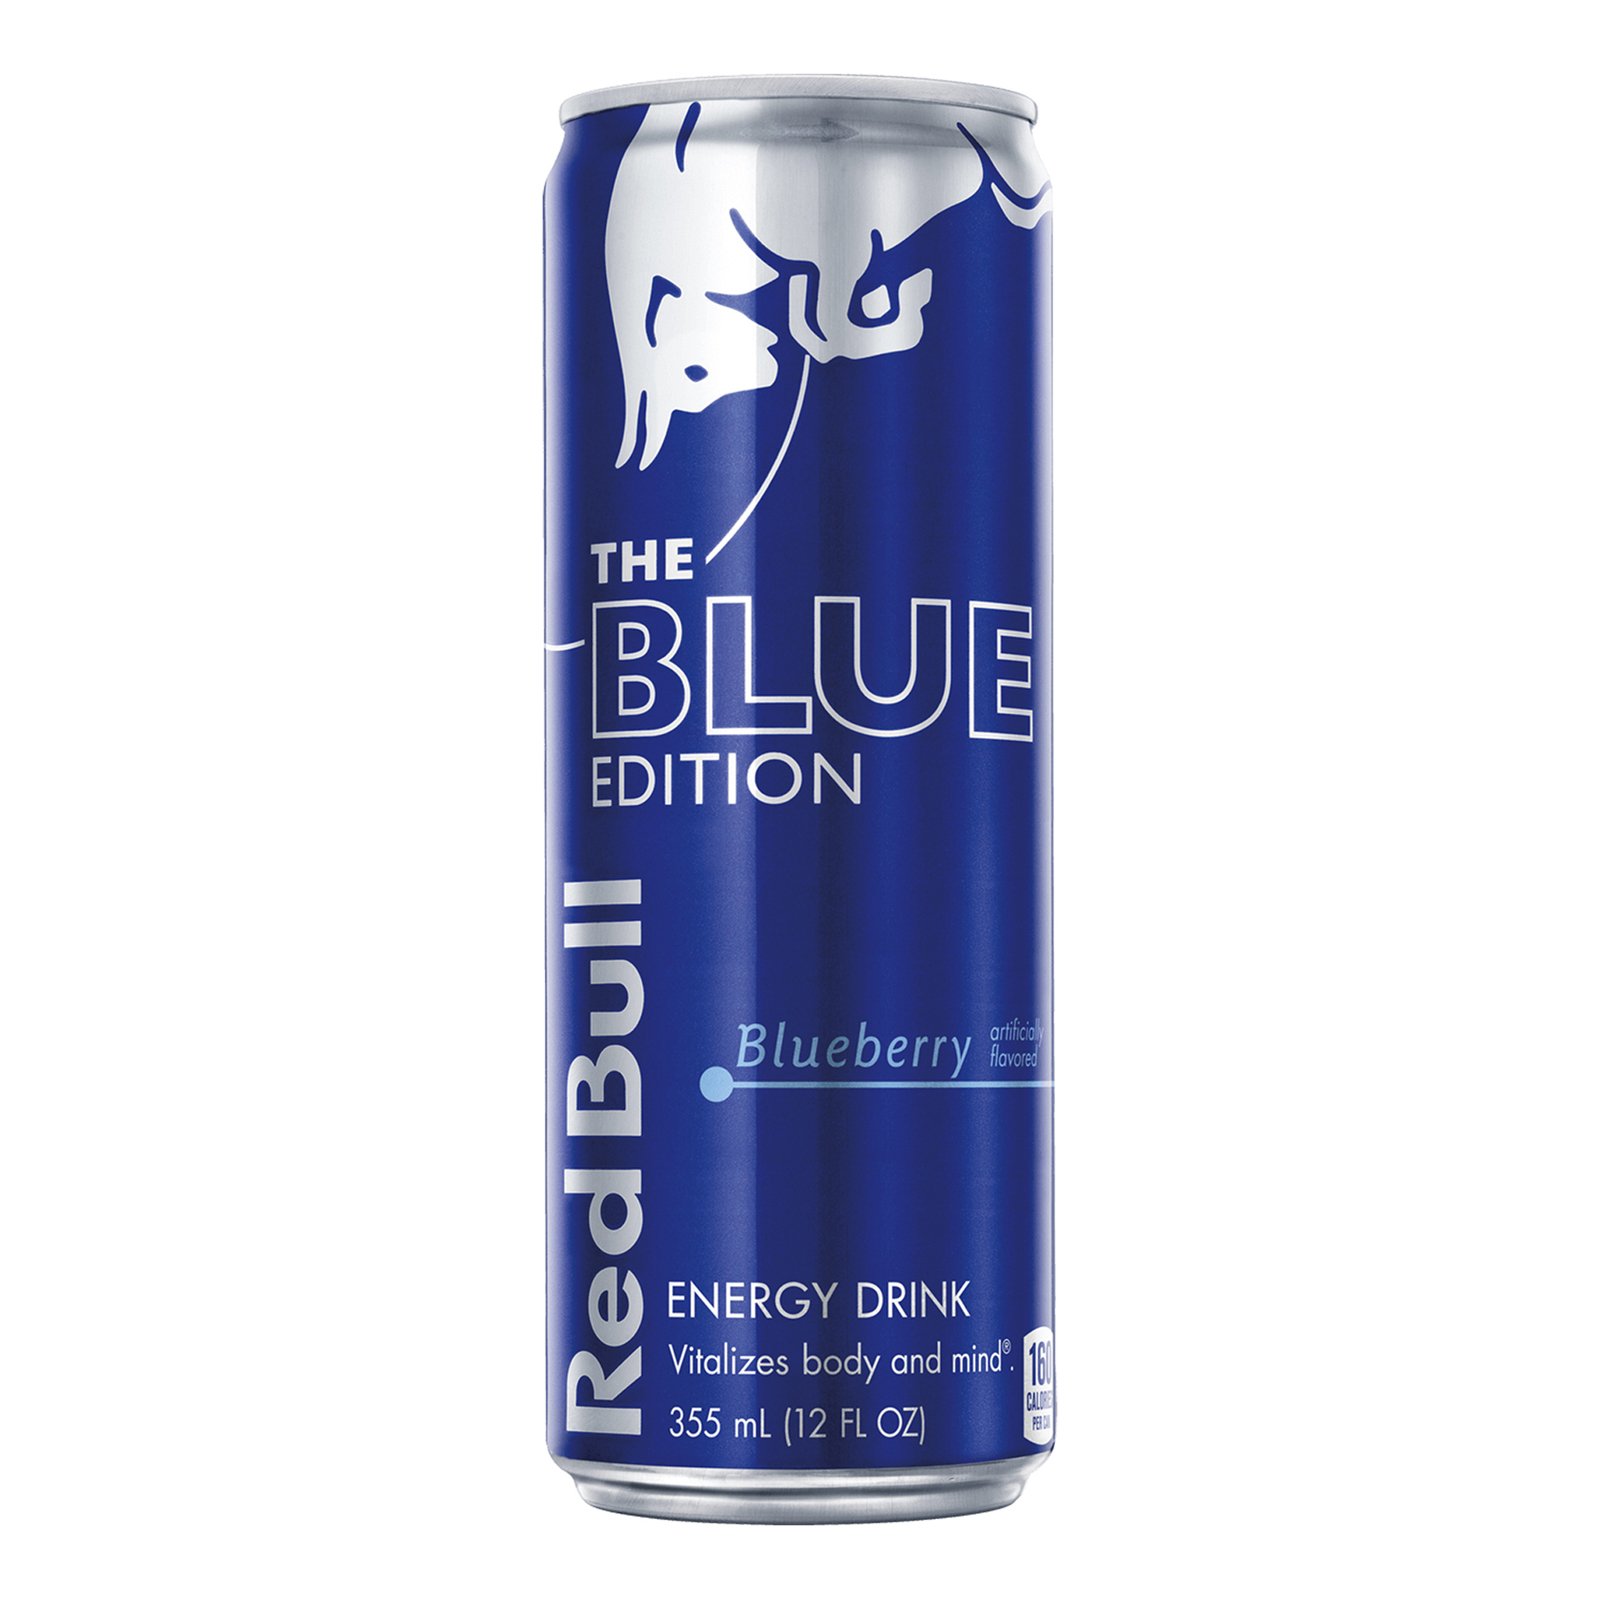 Red Bull The Edition Blueberry Energy Drink - Shop Sports & Energy Drinks at H-E-B